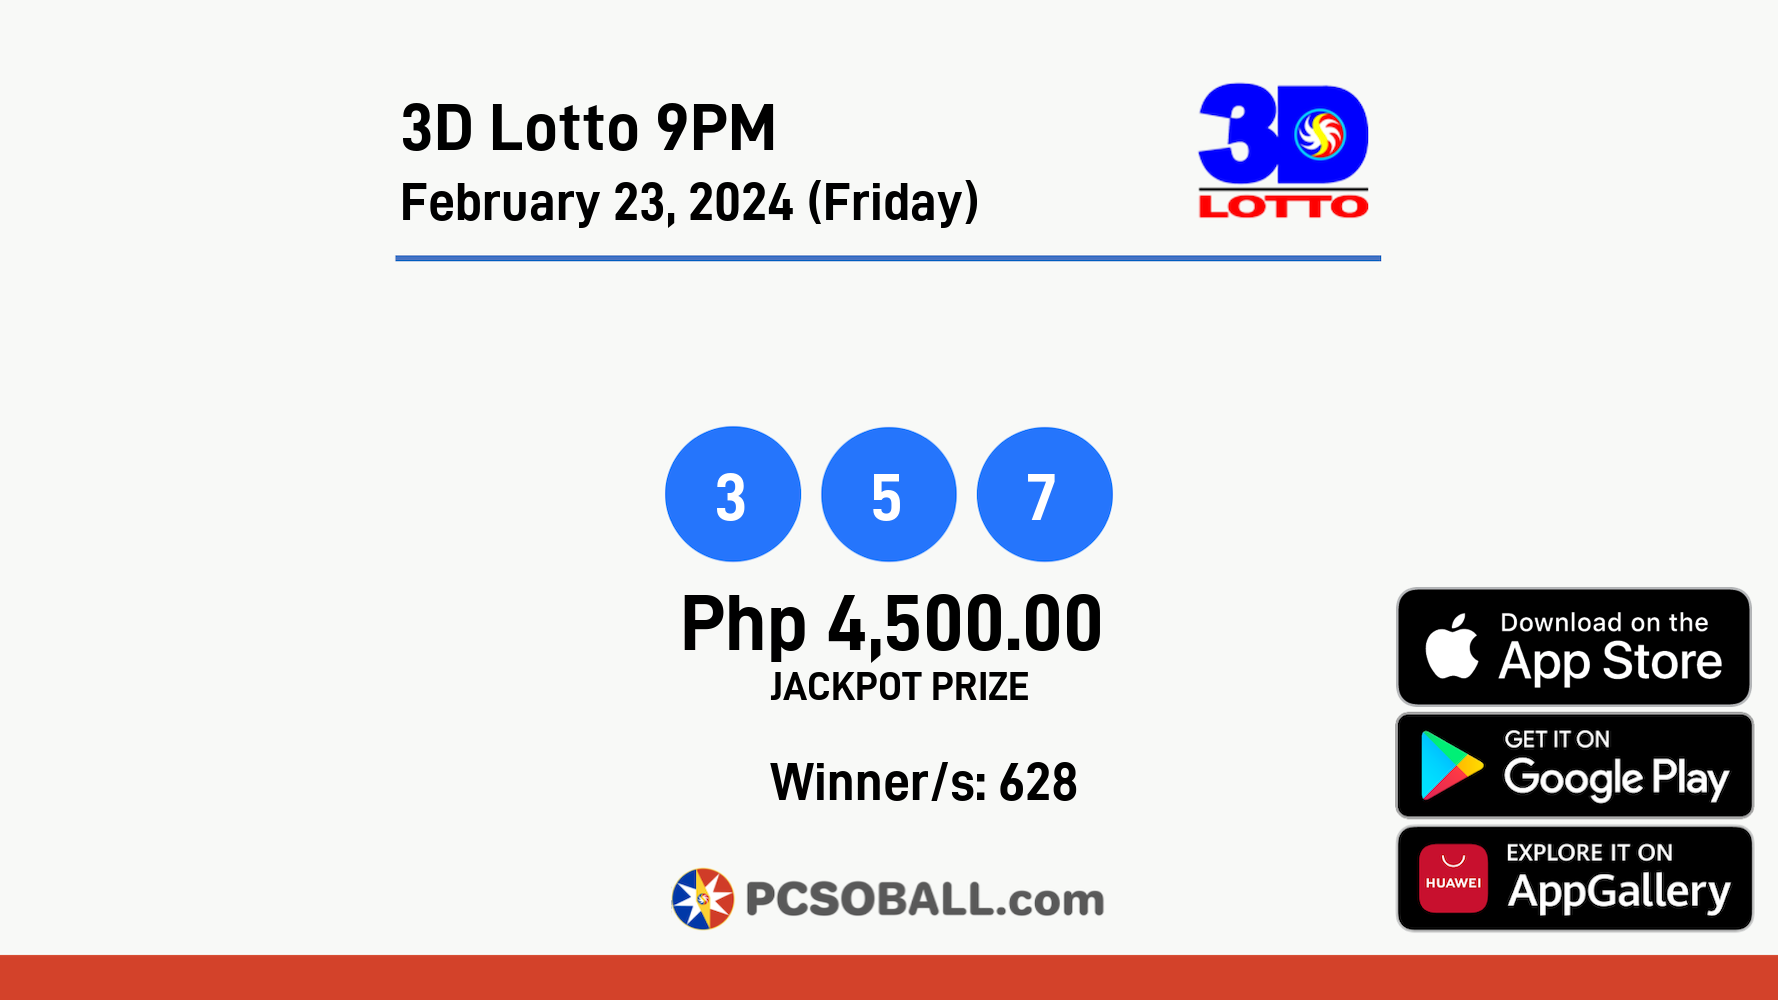 3D Lotto 9PM February 23, 2024 (Friday) Result